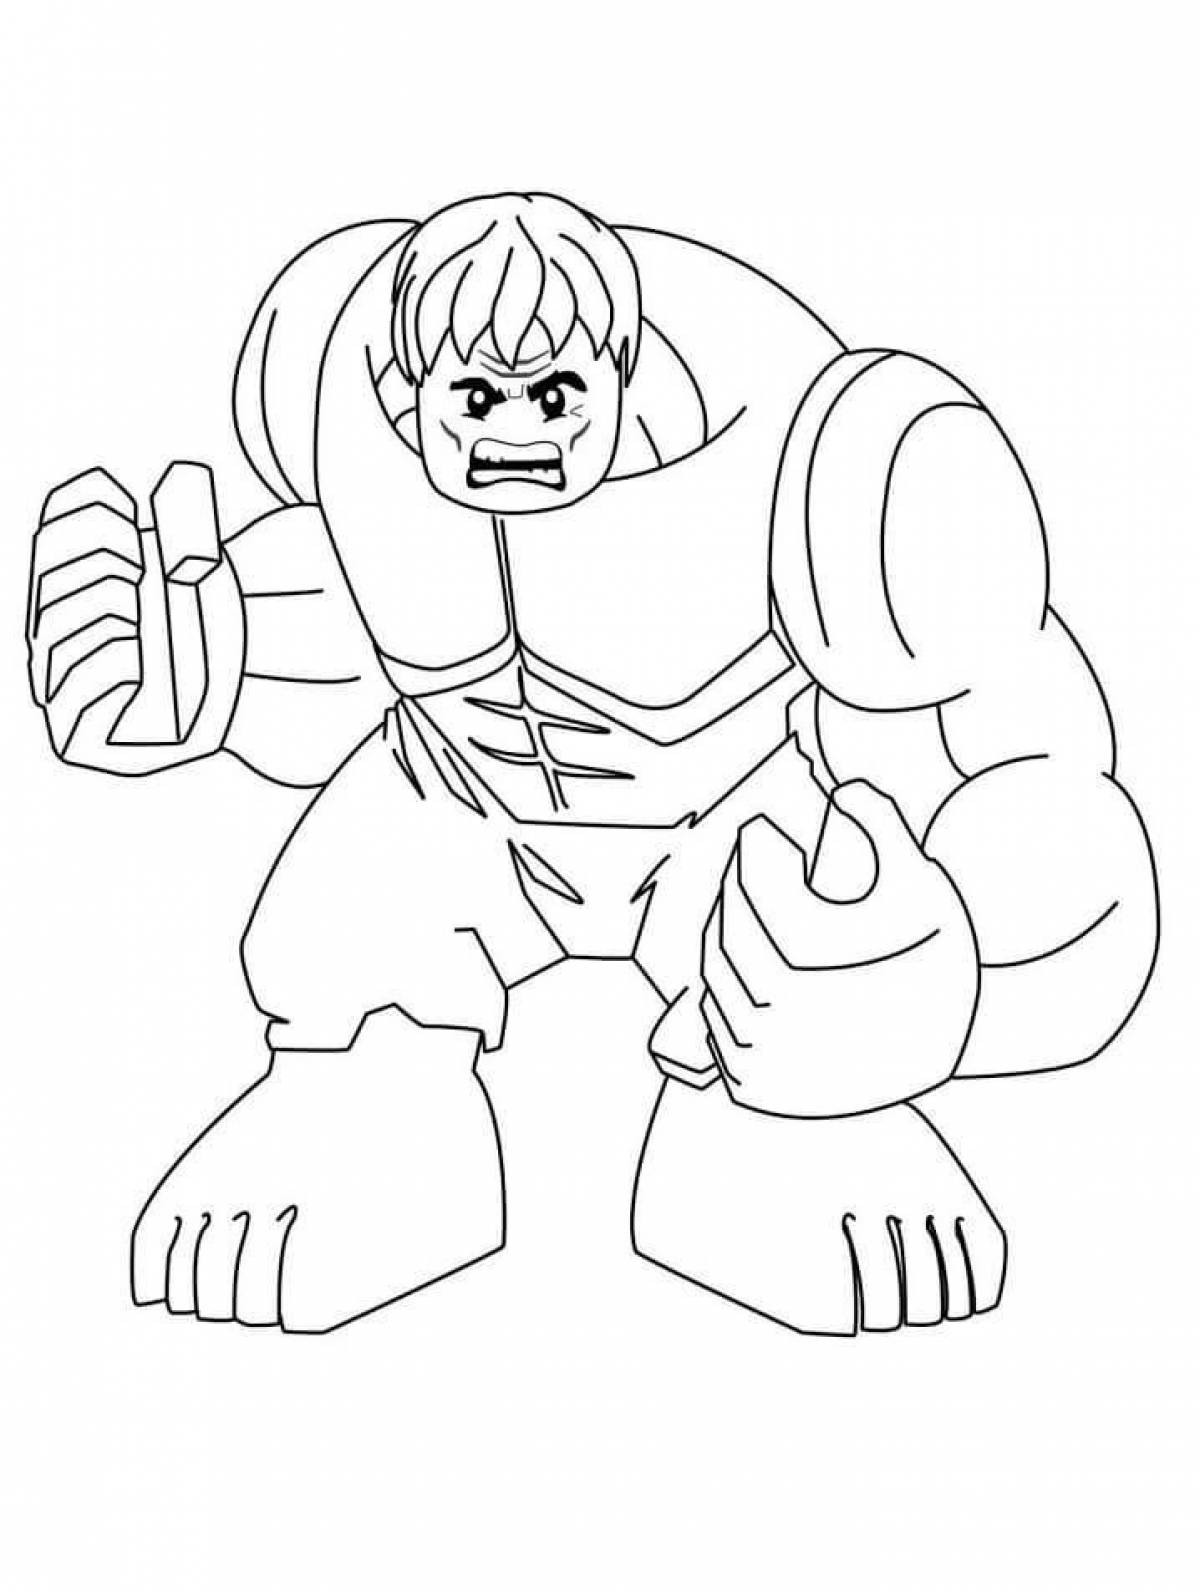 Fairy lego hulk coloring page